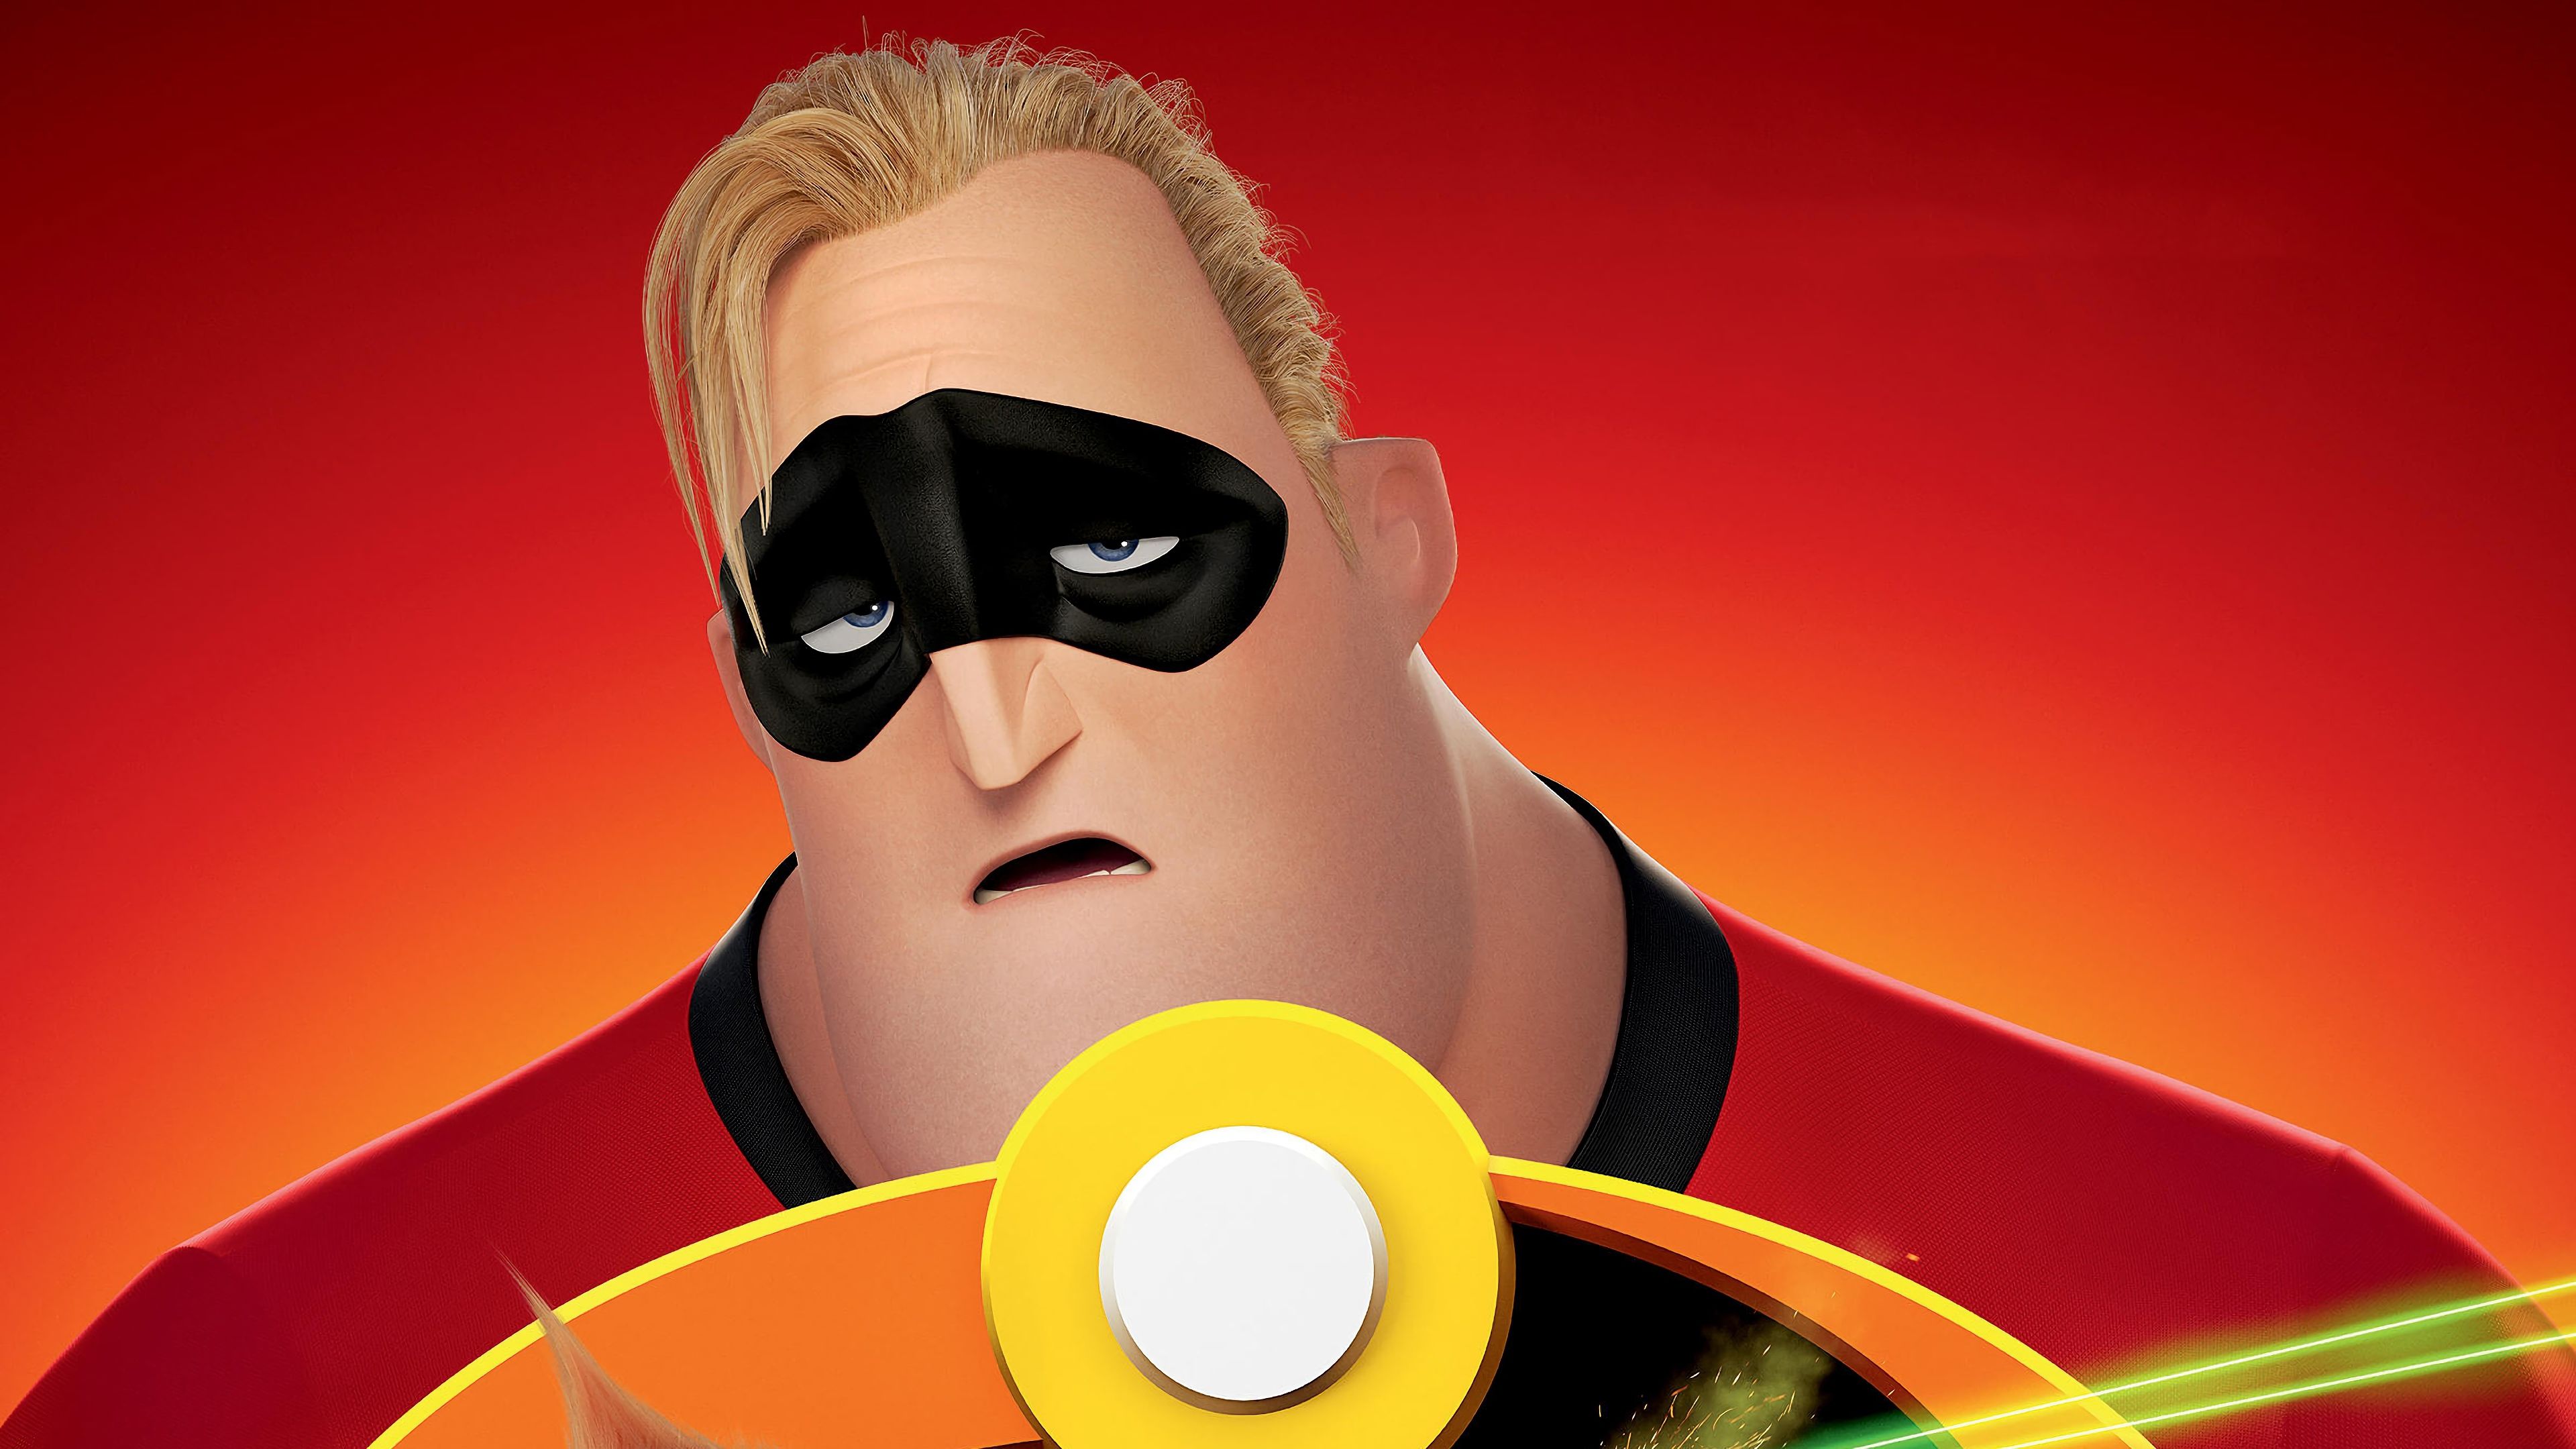 The Incredibles 2 Movie Mr. Incredible 4K